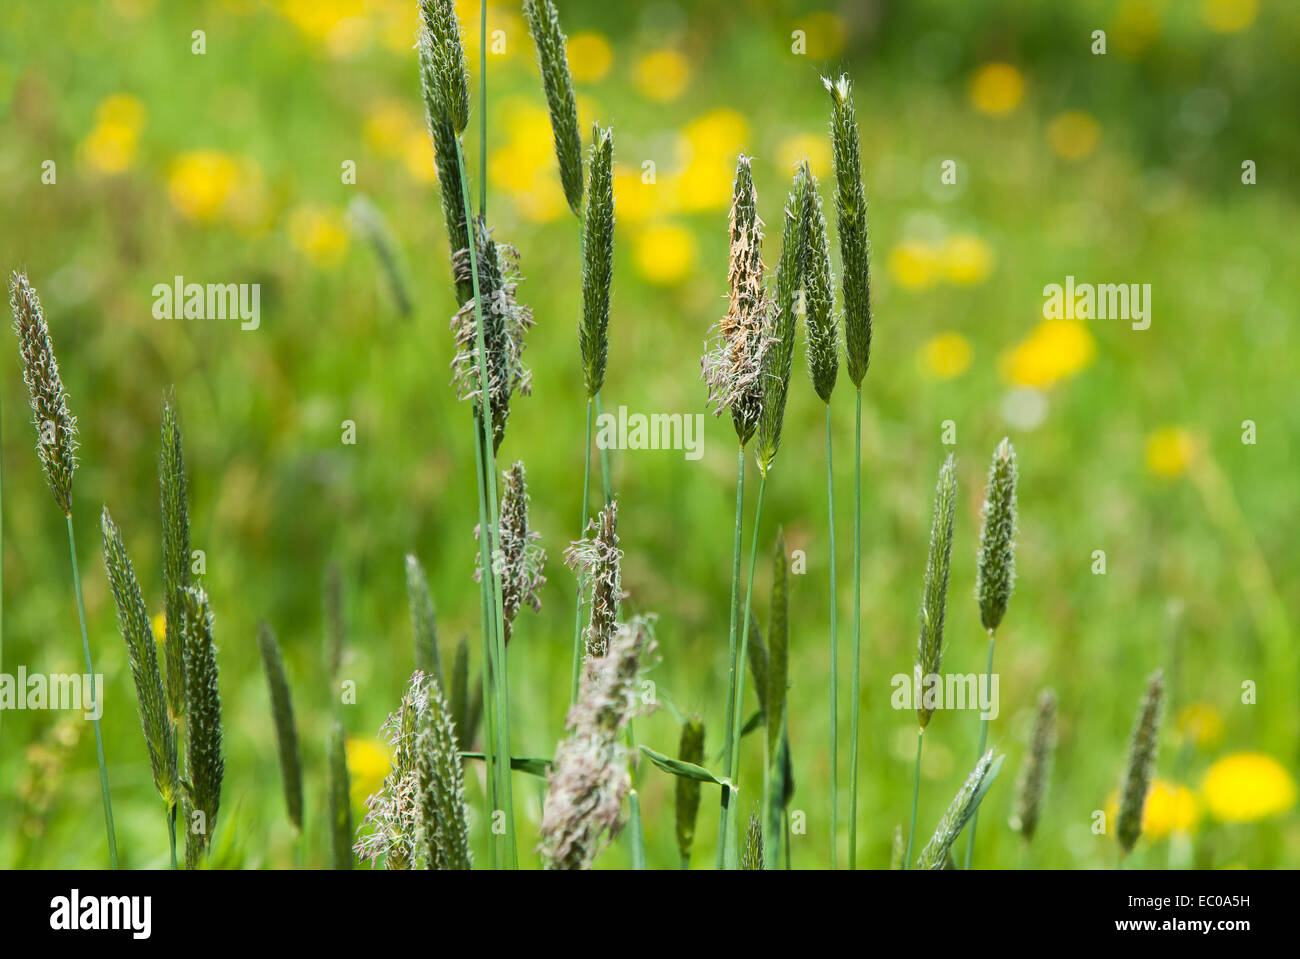 Allergy concept: bloom grass on green meadow Stock Photo